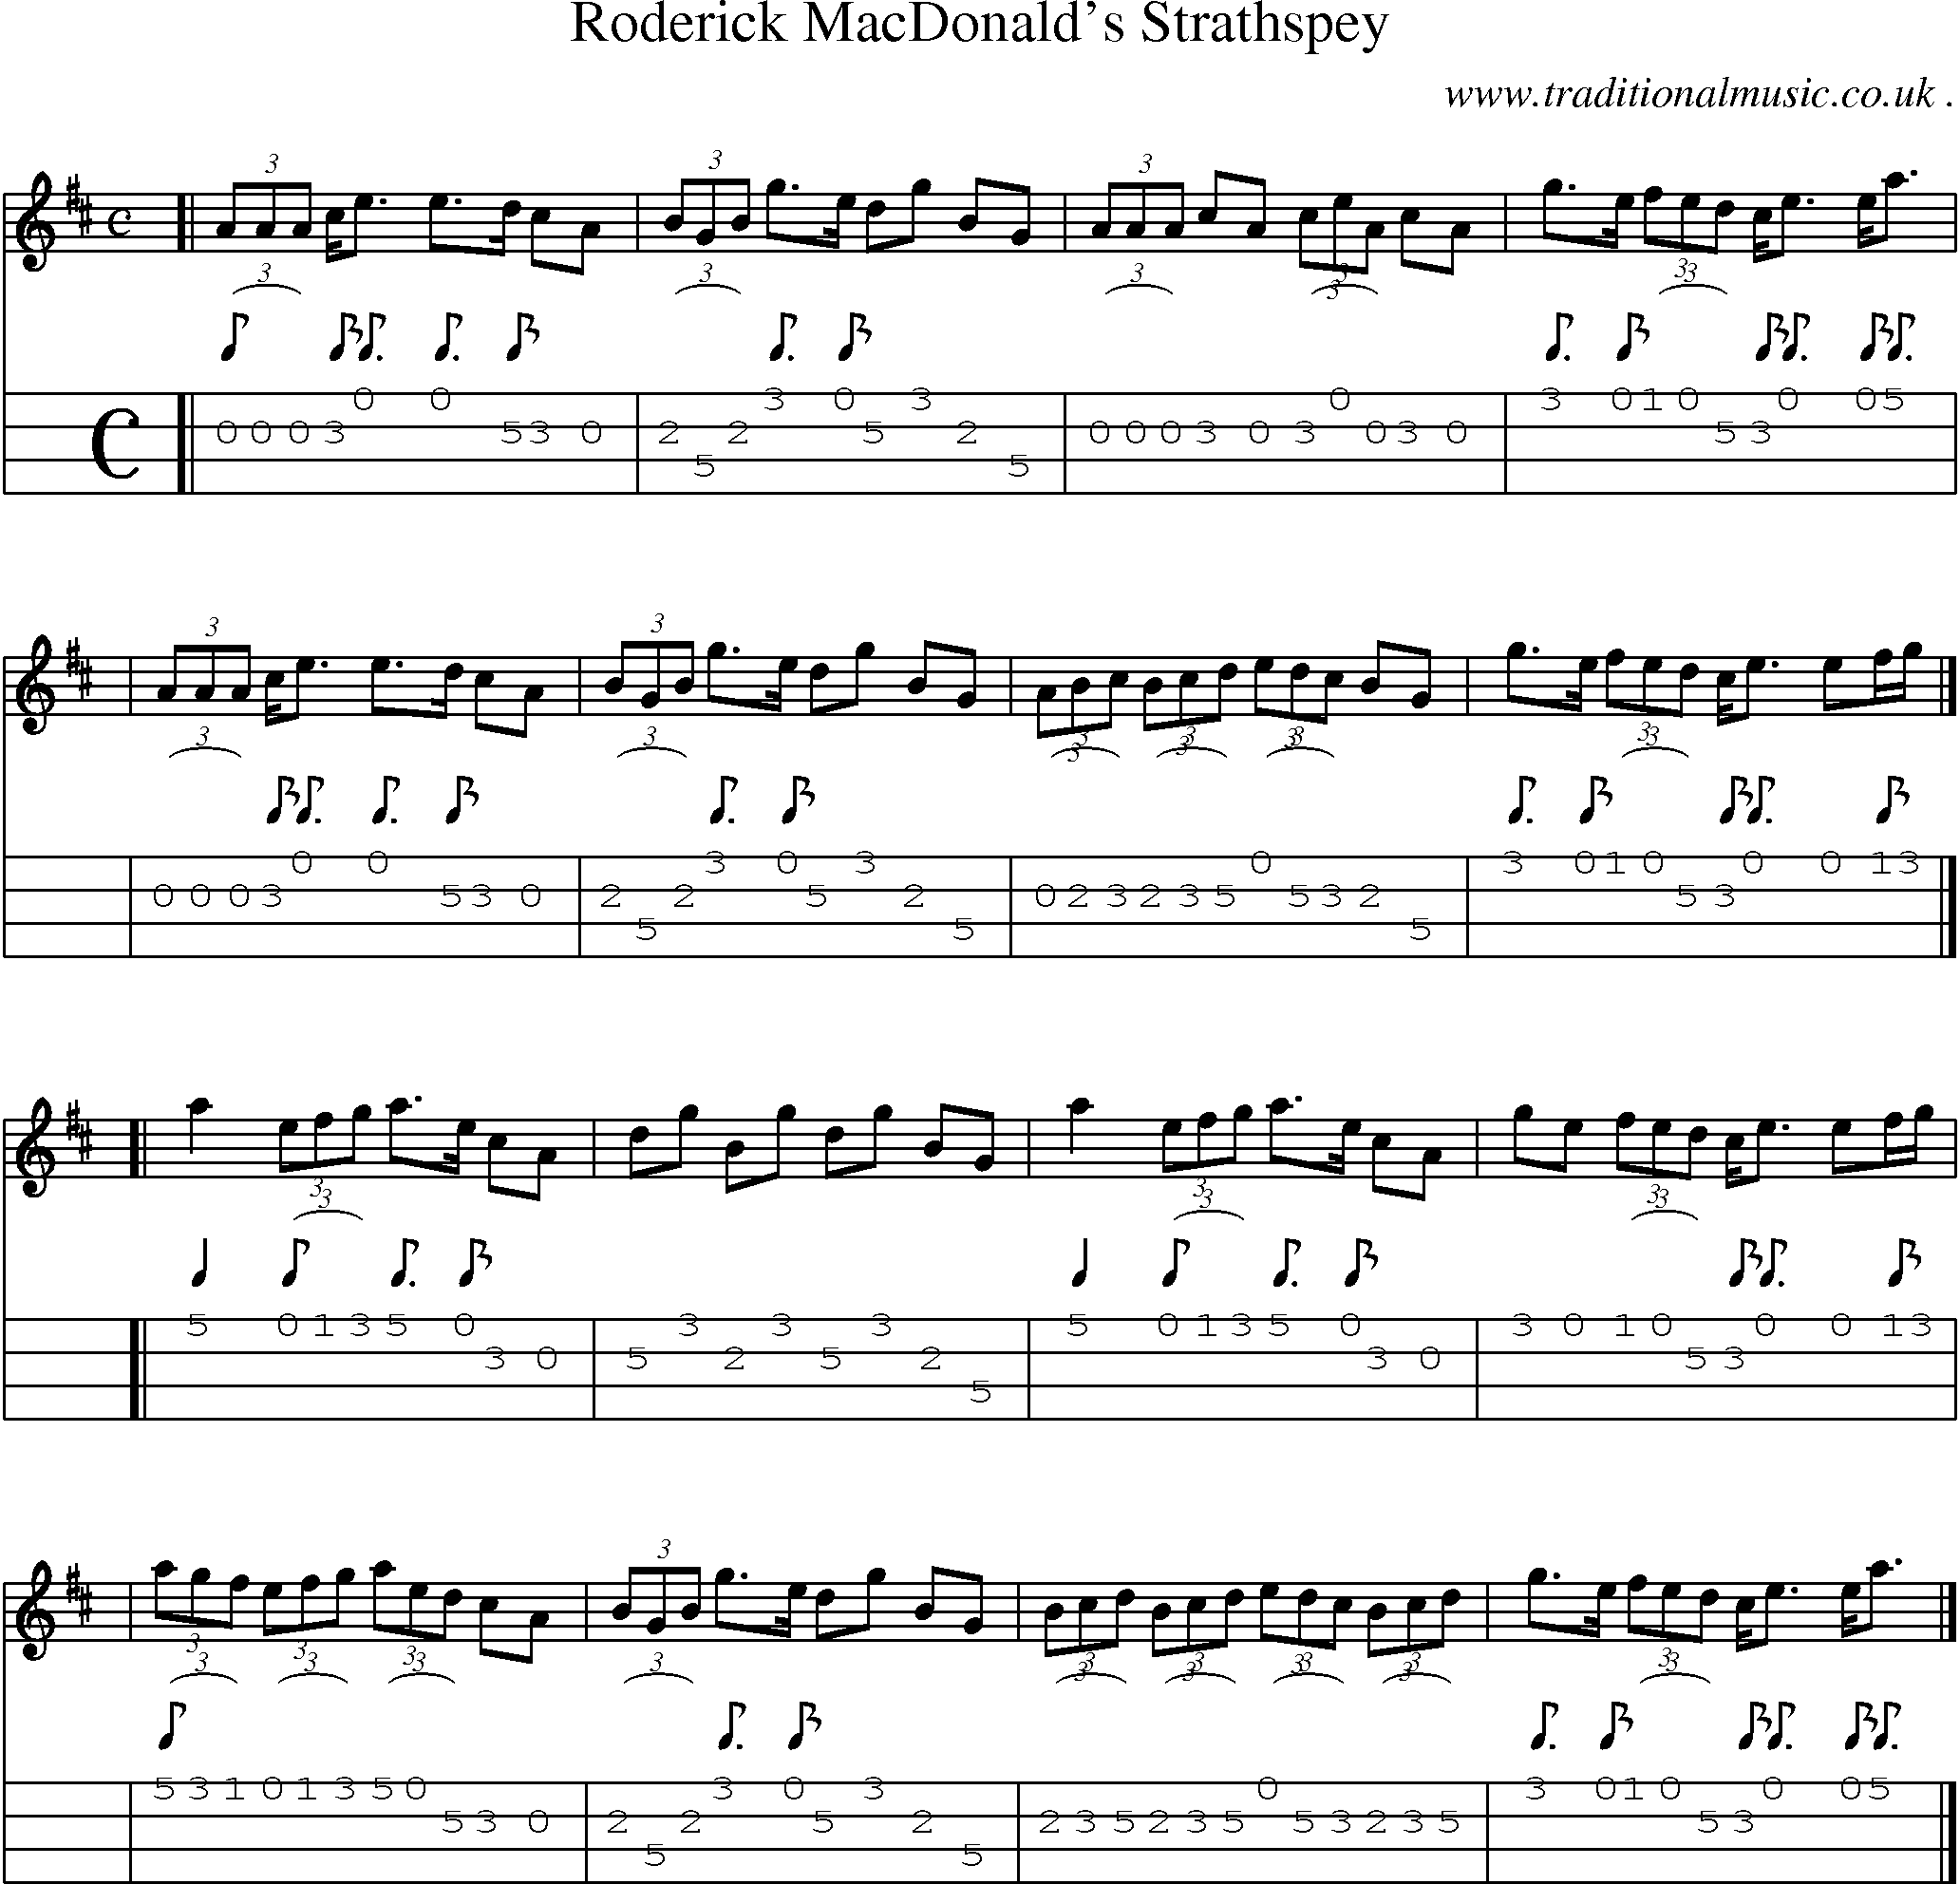 Sheet-music  score, Chords and Mandolin Tabs for Roderick Macdonalds Strathspey